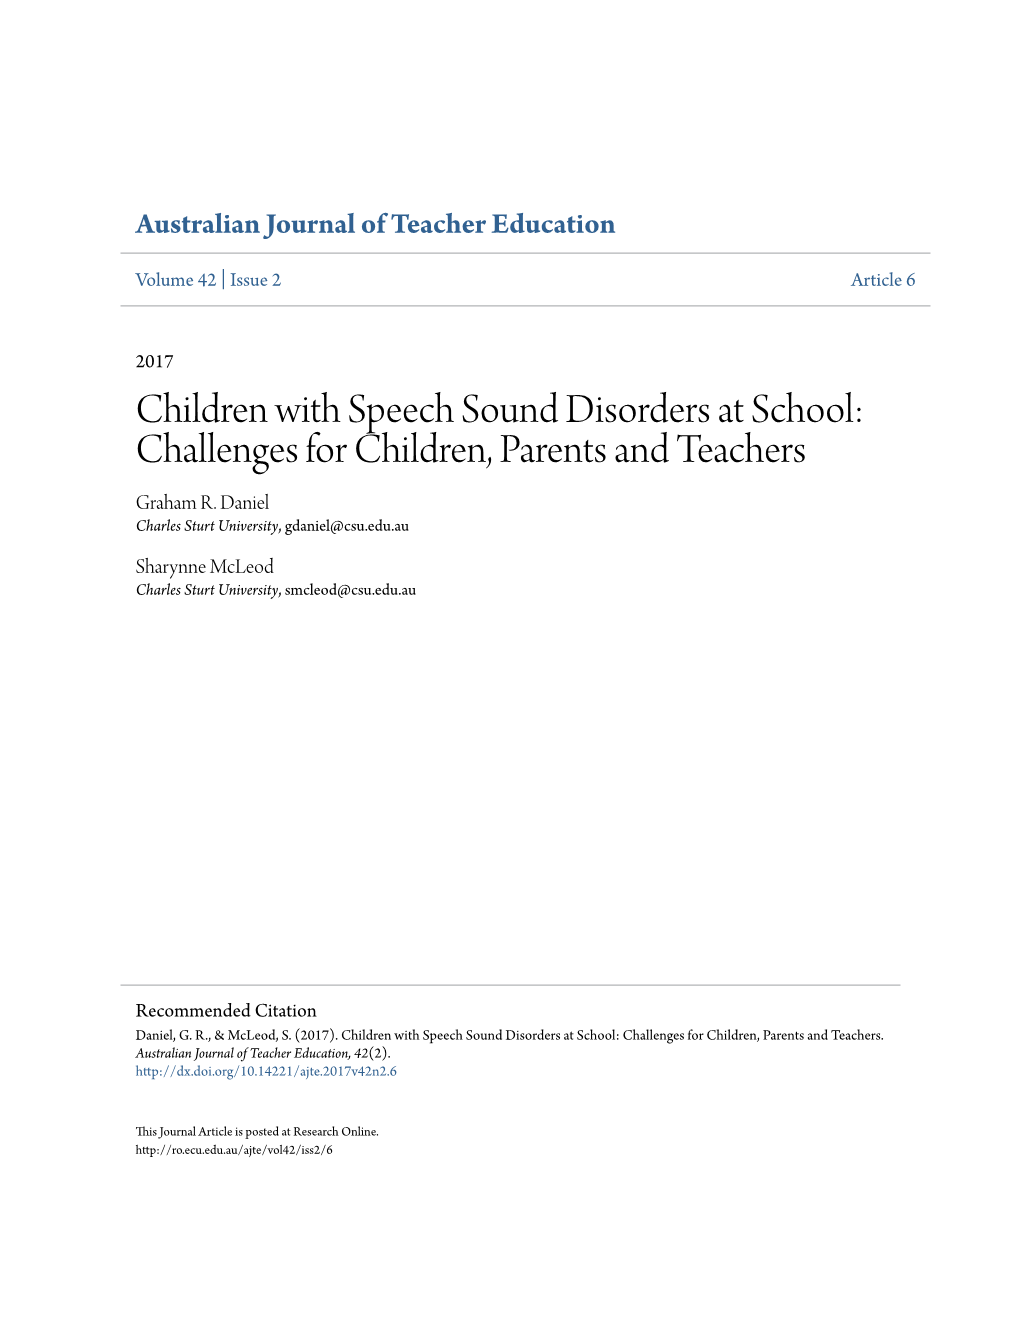 Children with Speech Sound Disorders at School: Challenges for Children, Parents and Teachers Graham R